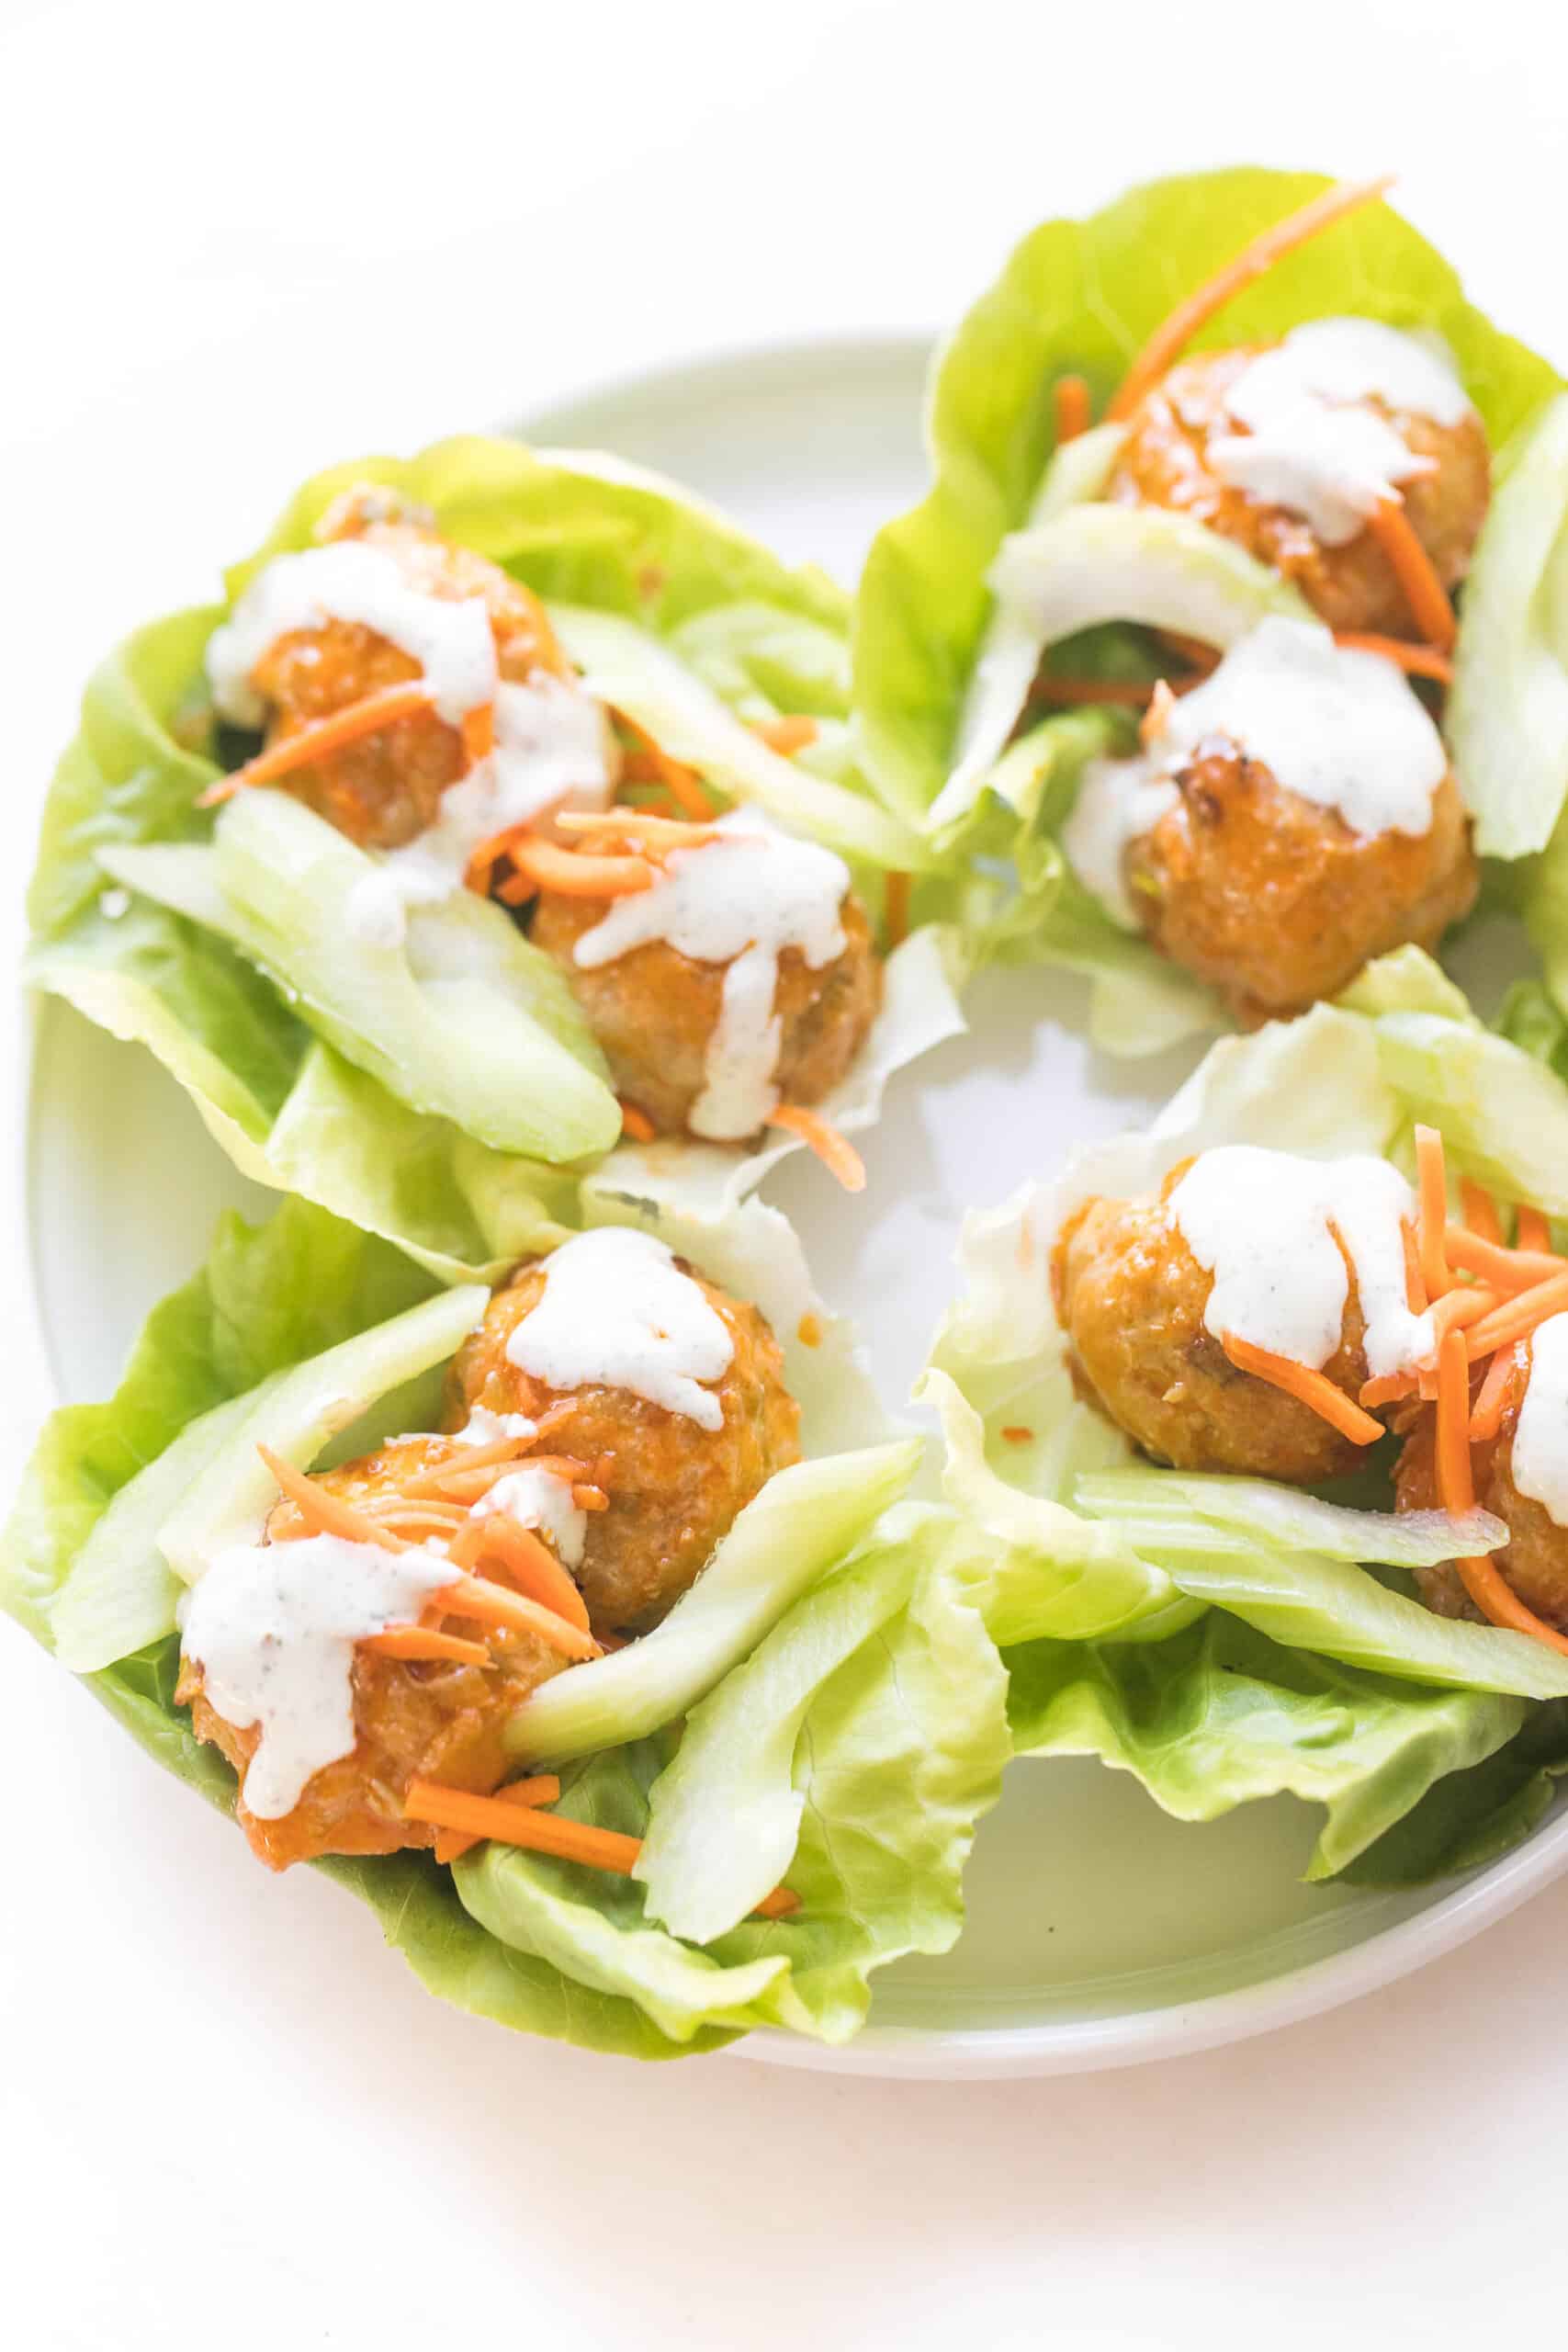 keto buffalo turkey meatballs on lettuce wraps topped with ranch dressing on a white plate and background